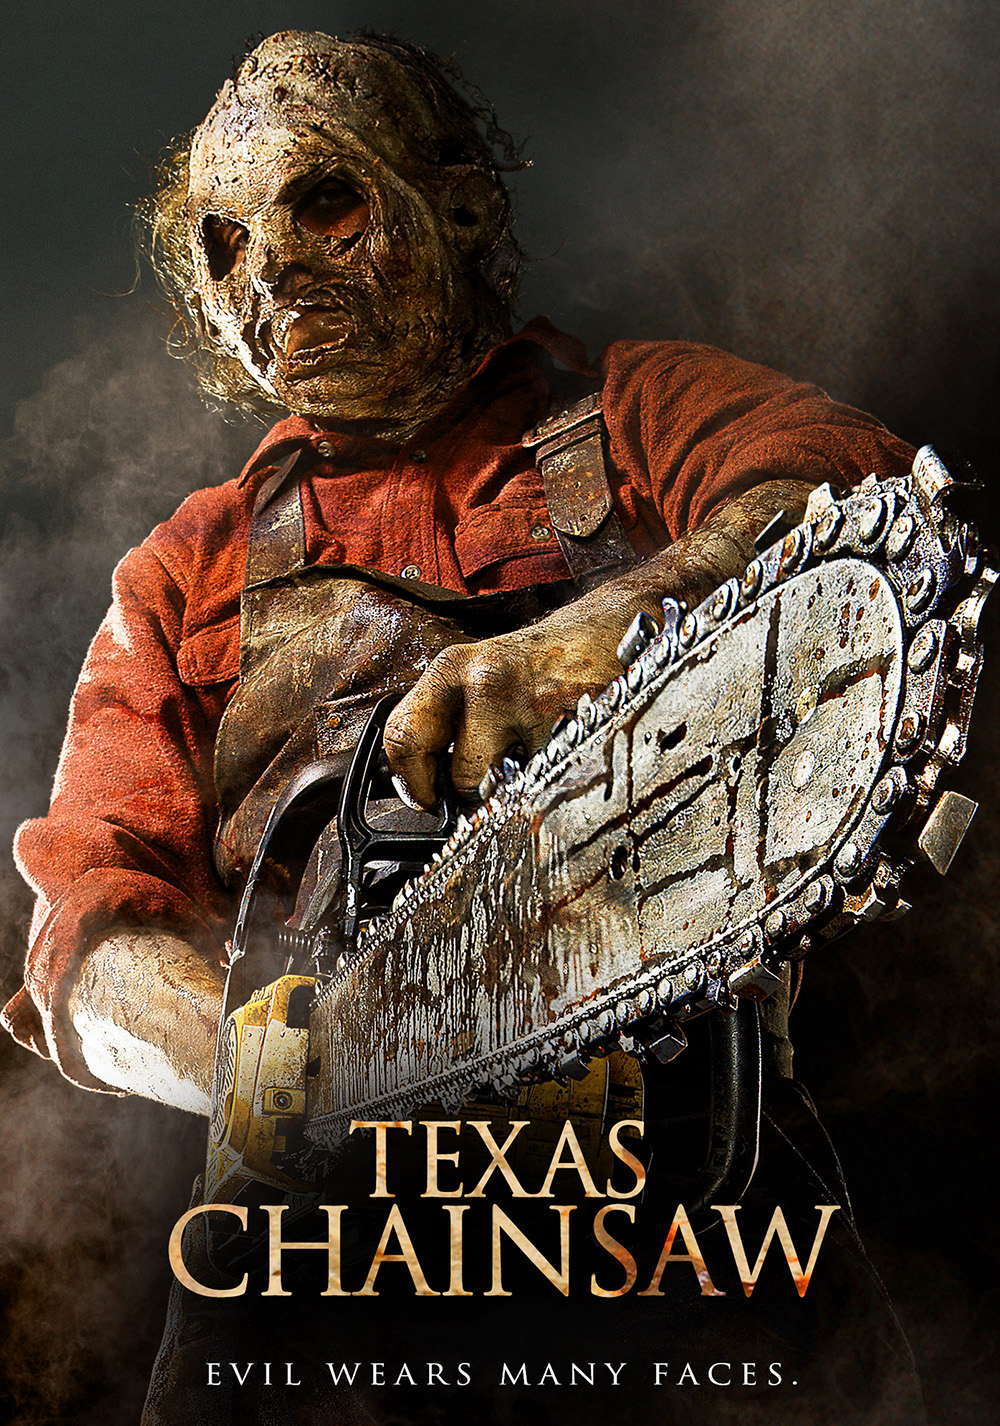 Texas Chainsaw 3D Movie Poster - ID: 129511 - Image Abyss